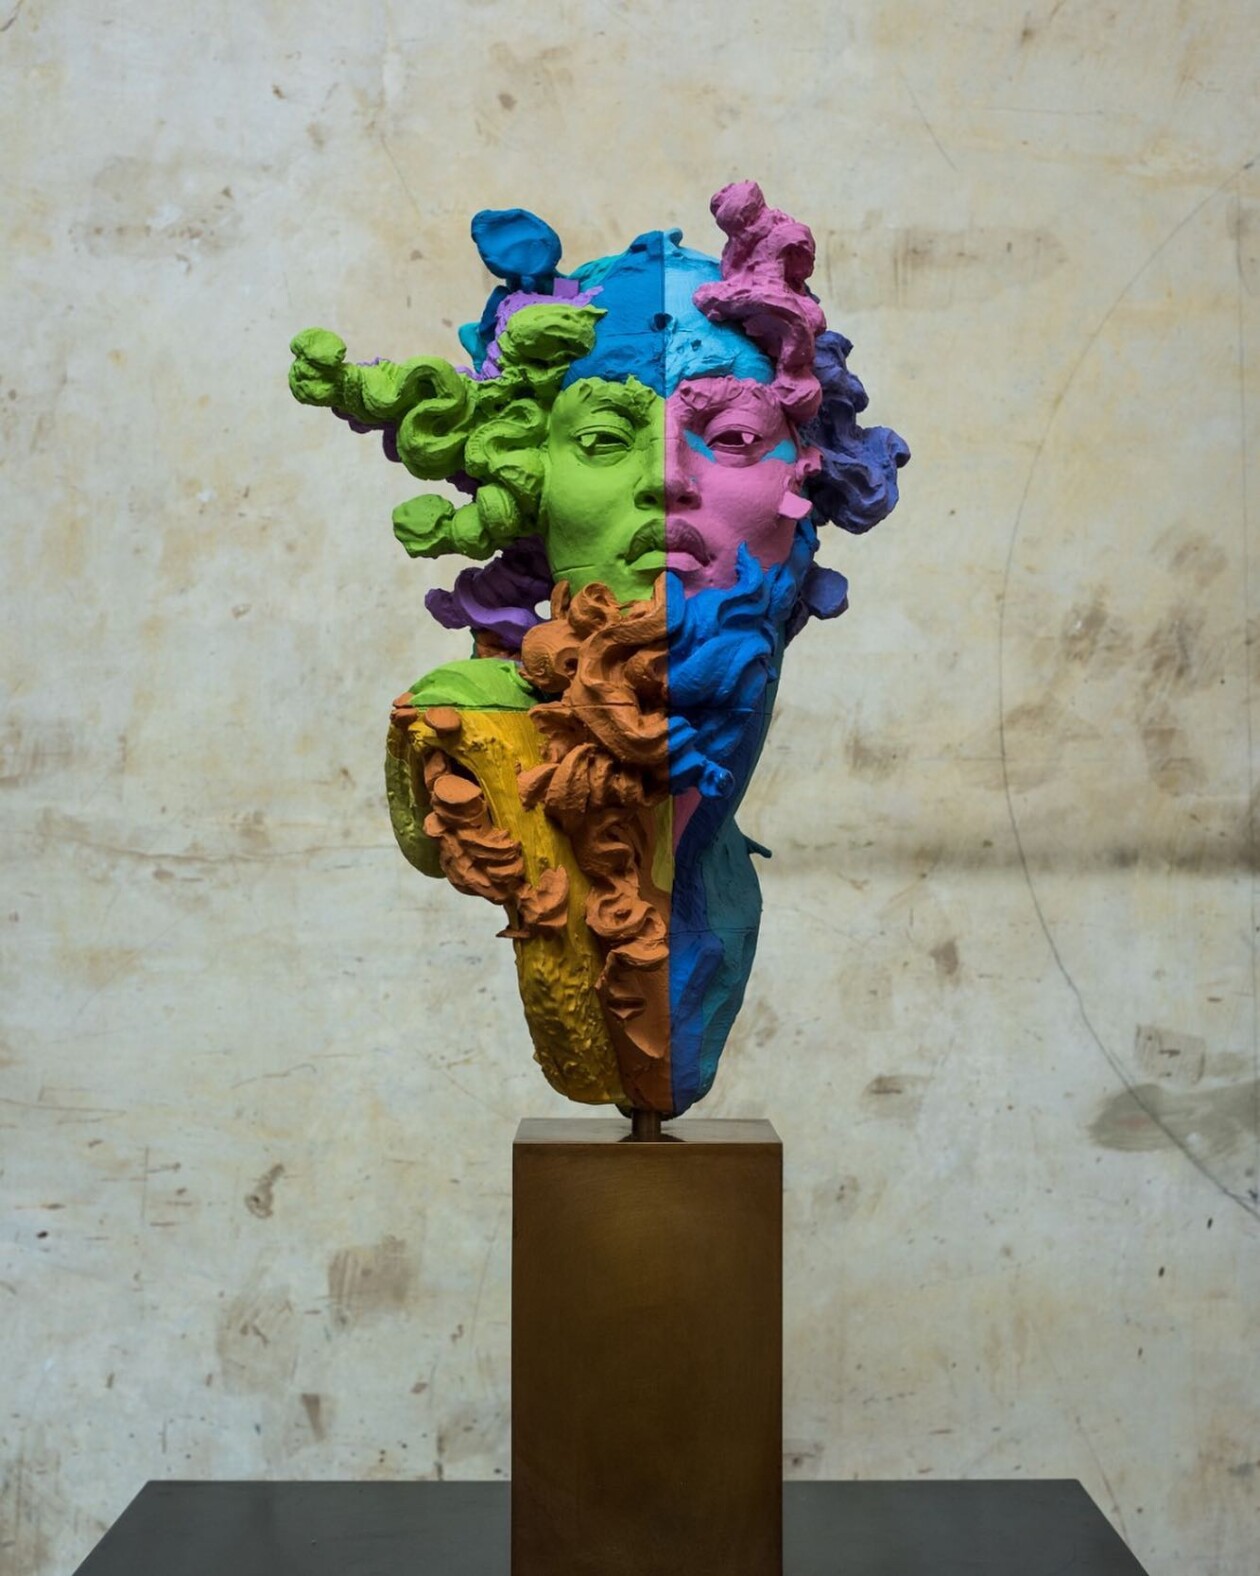 Multicolored 3d Printed Sculptures By Javier Marin (9)